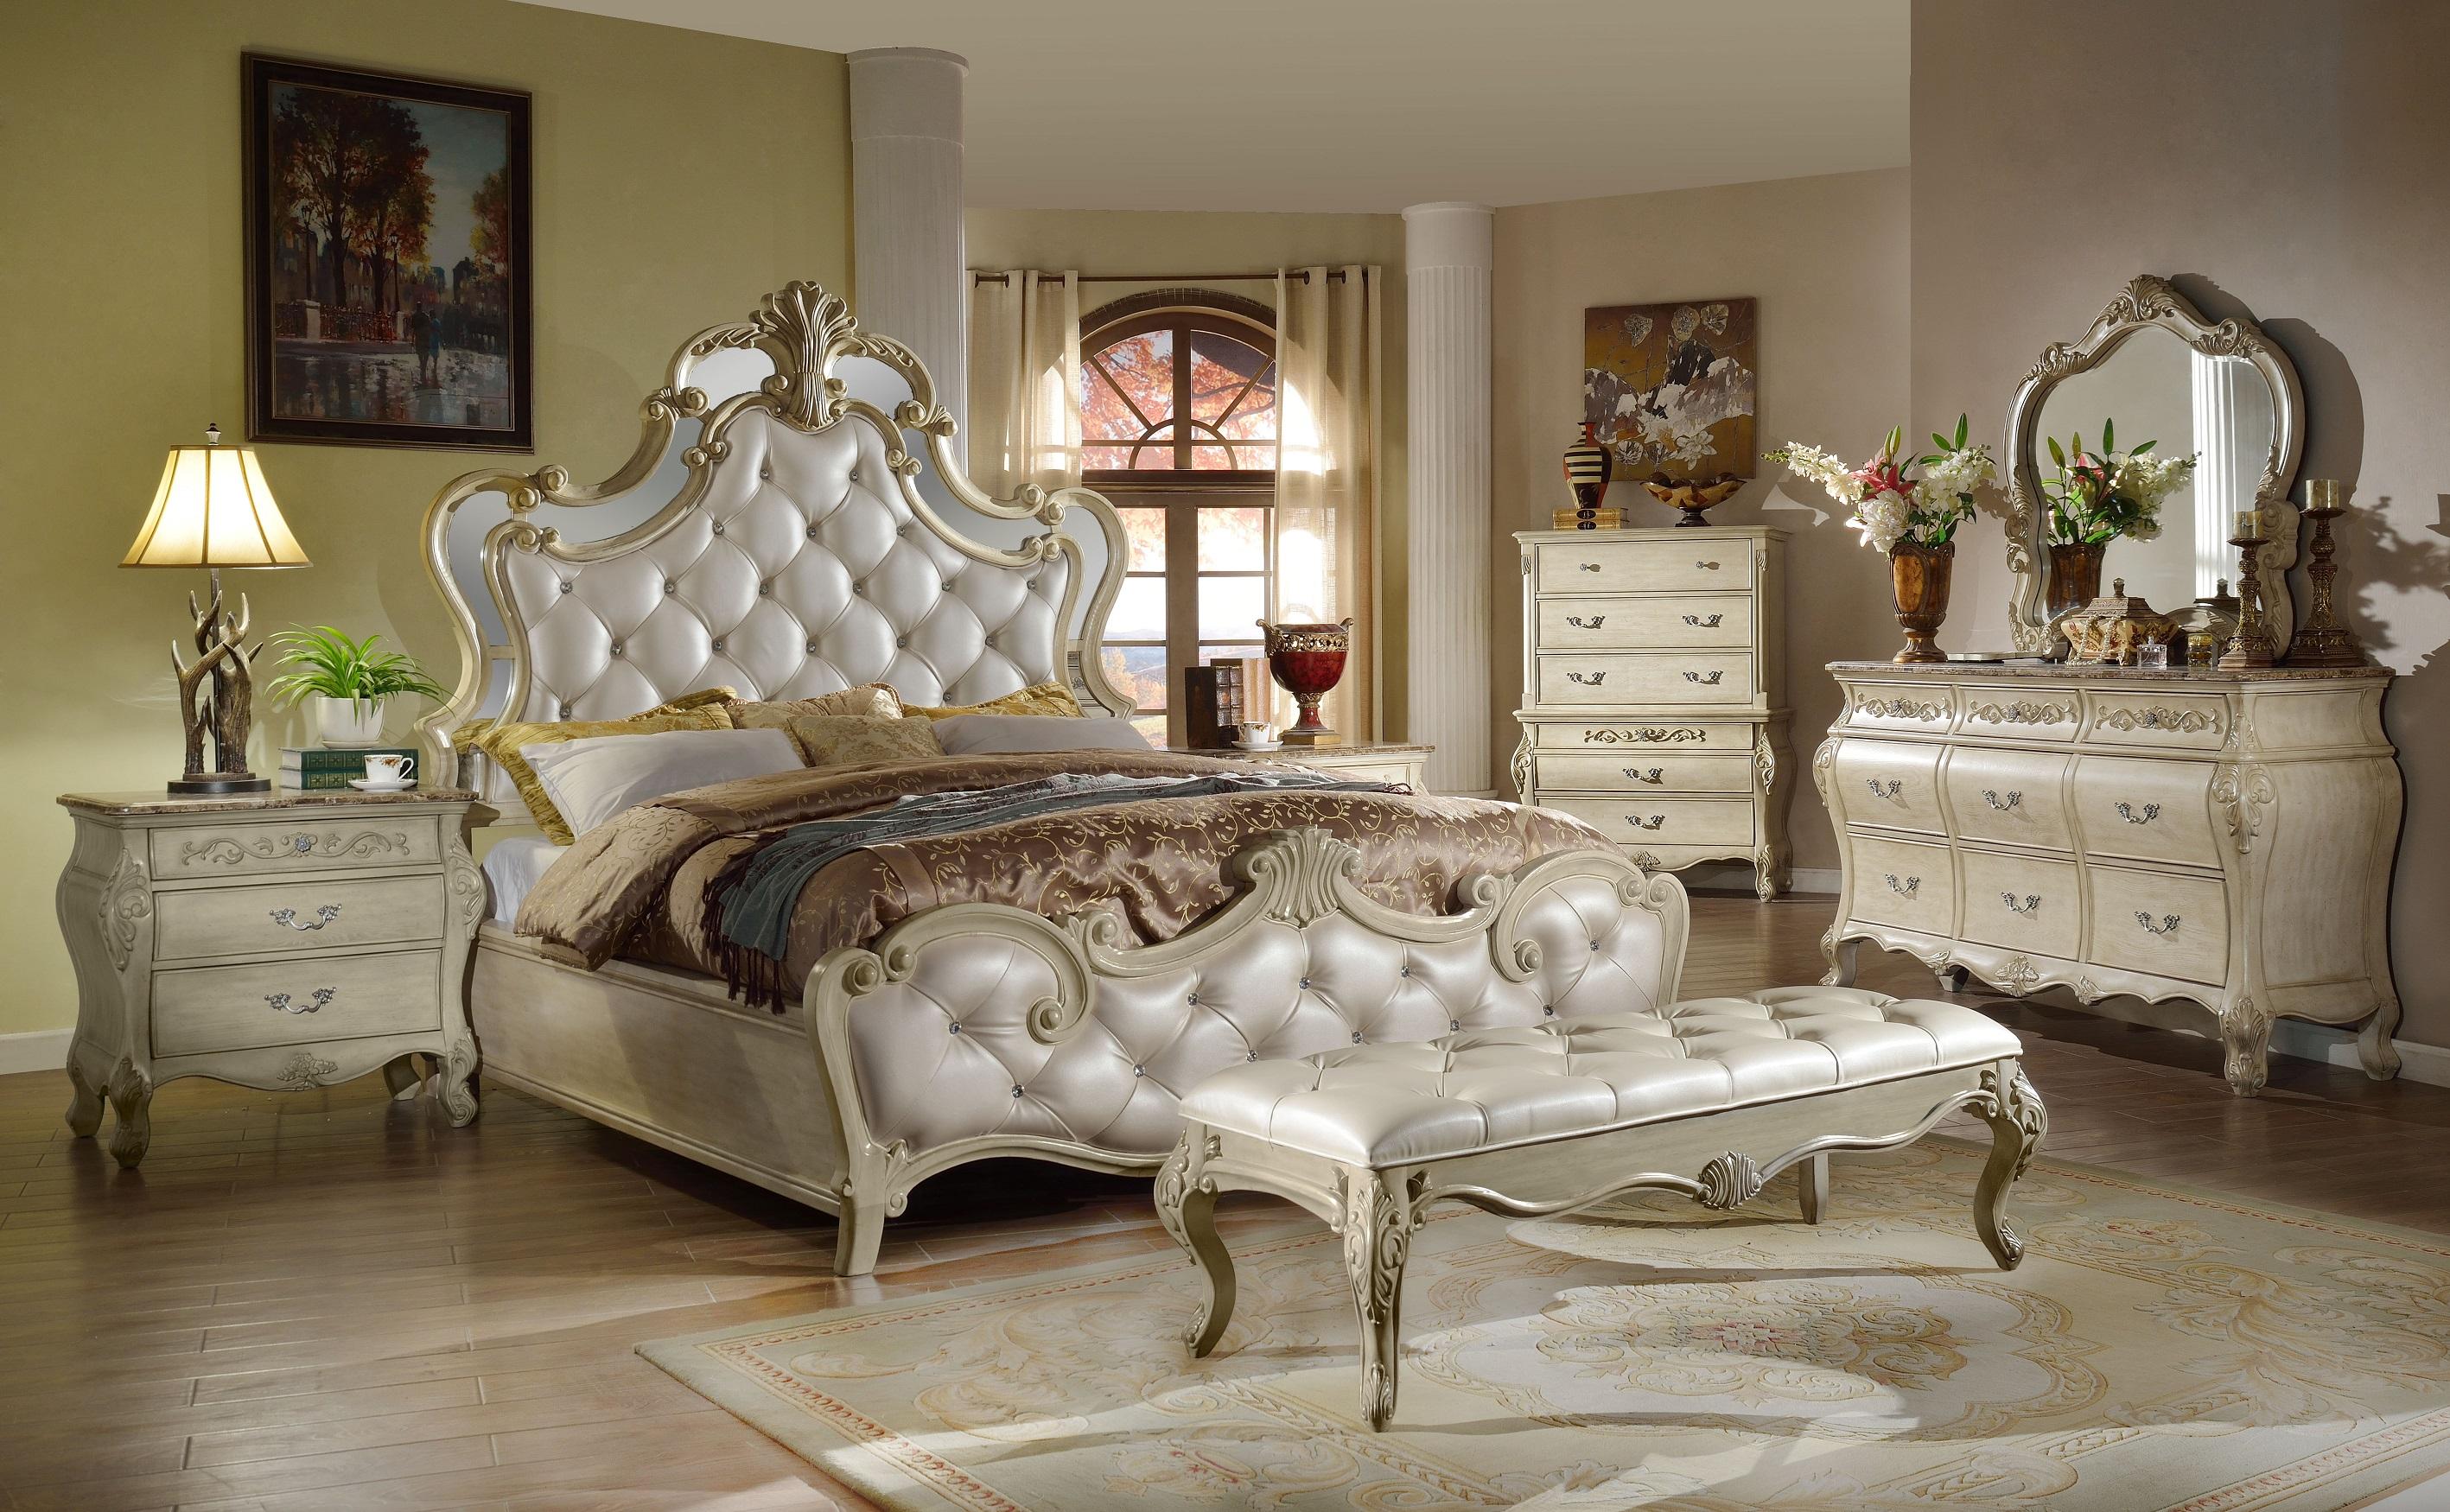 

    
McFerran B8305 Antique White Glamour Tufted Fabric Queen Bedroom Set 6Pcs
